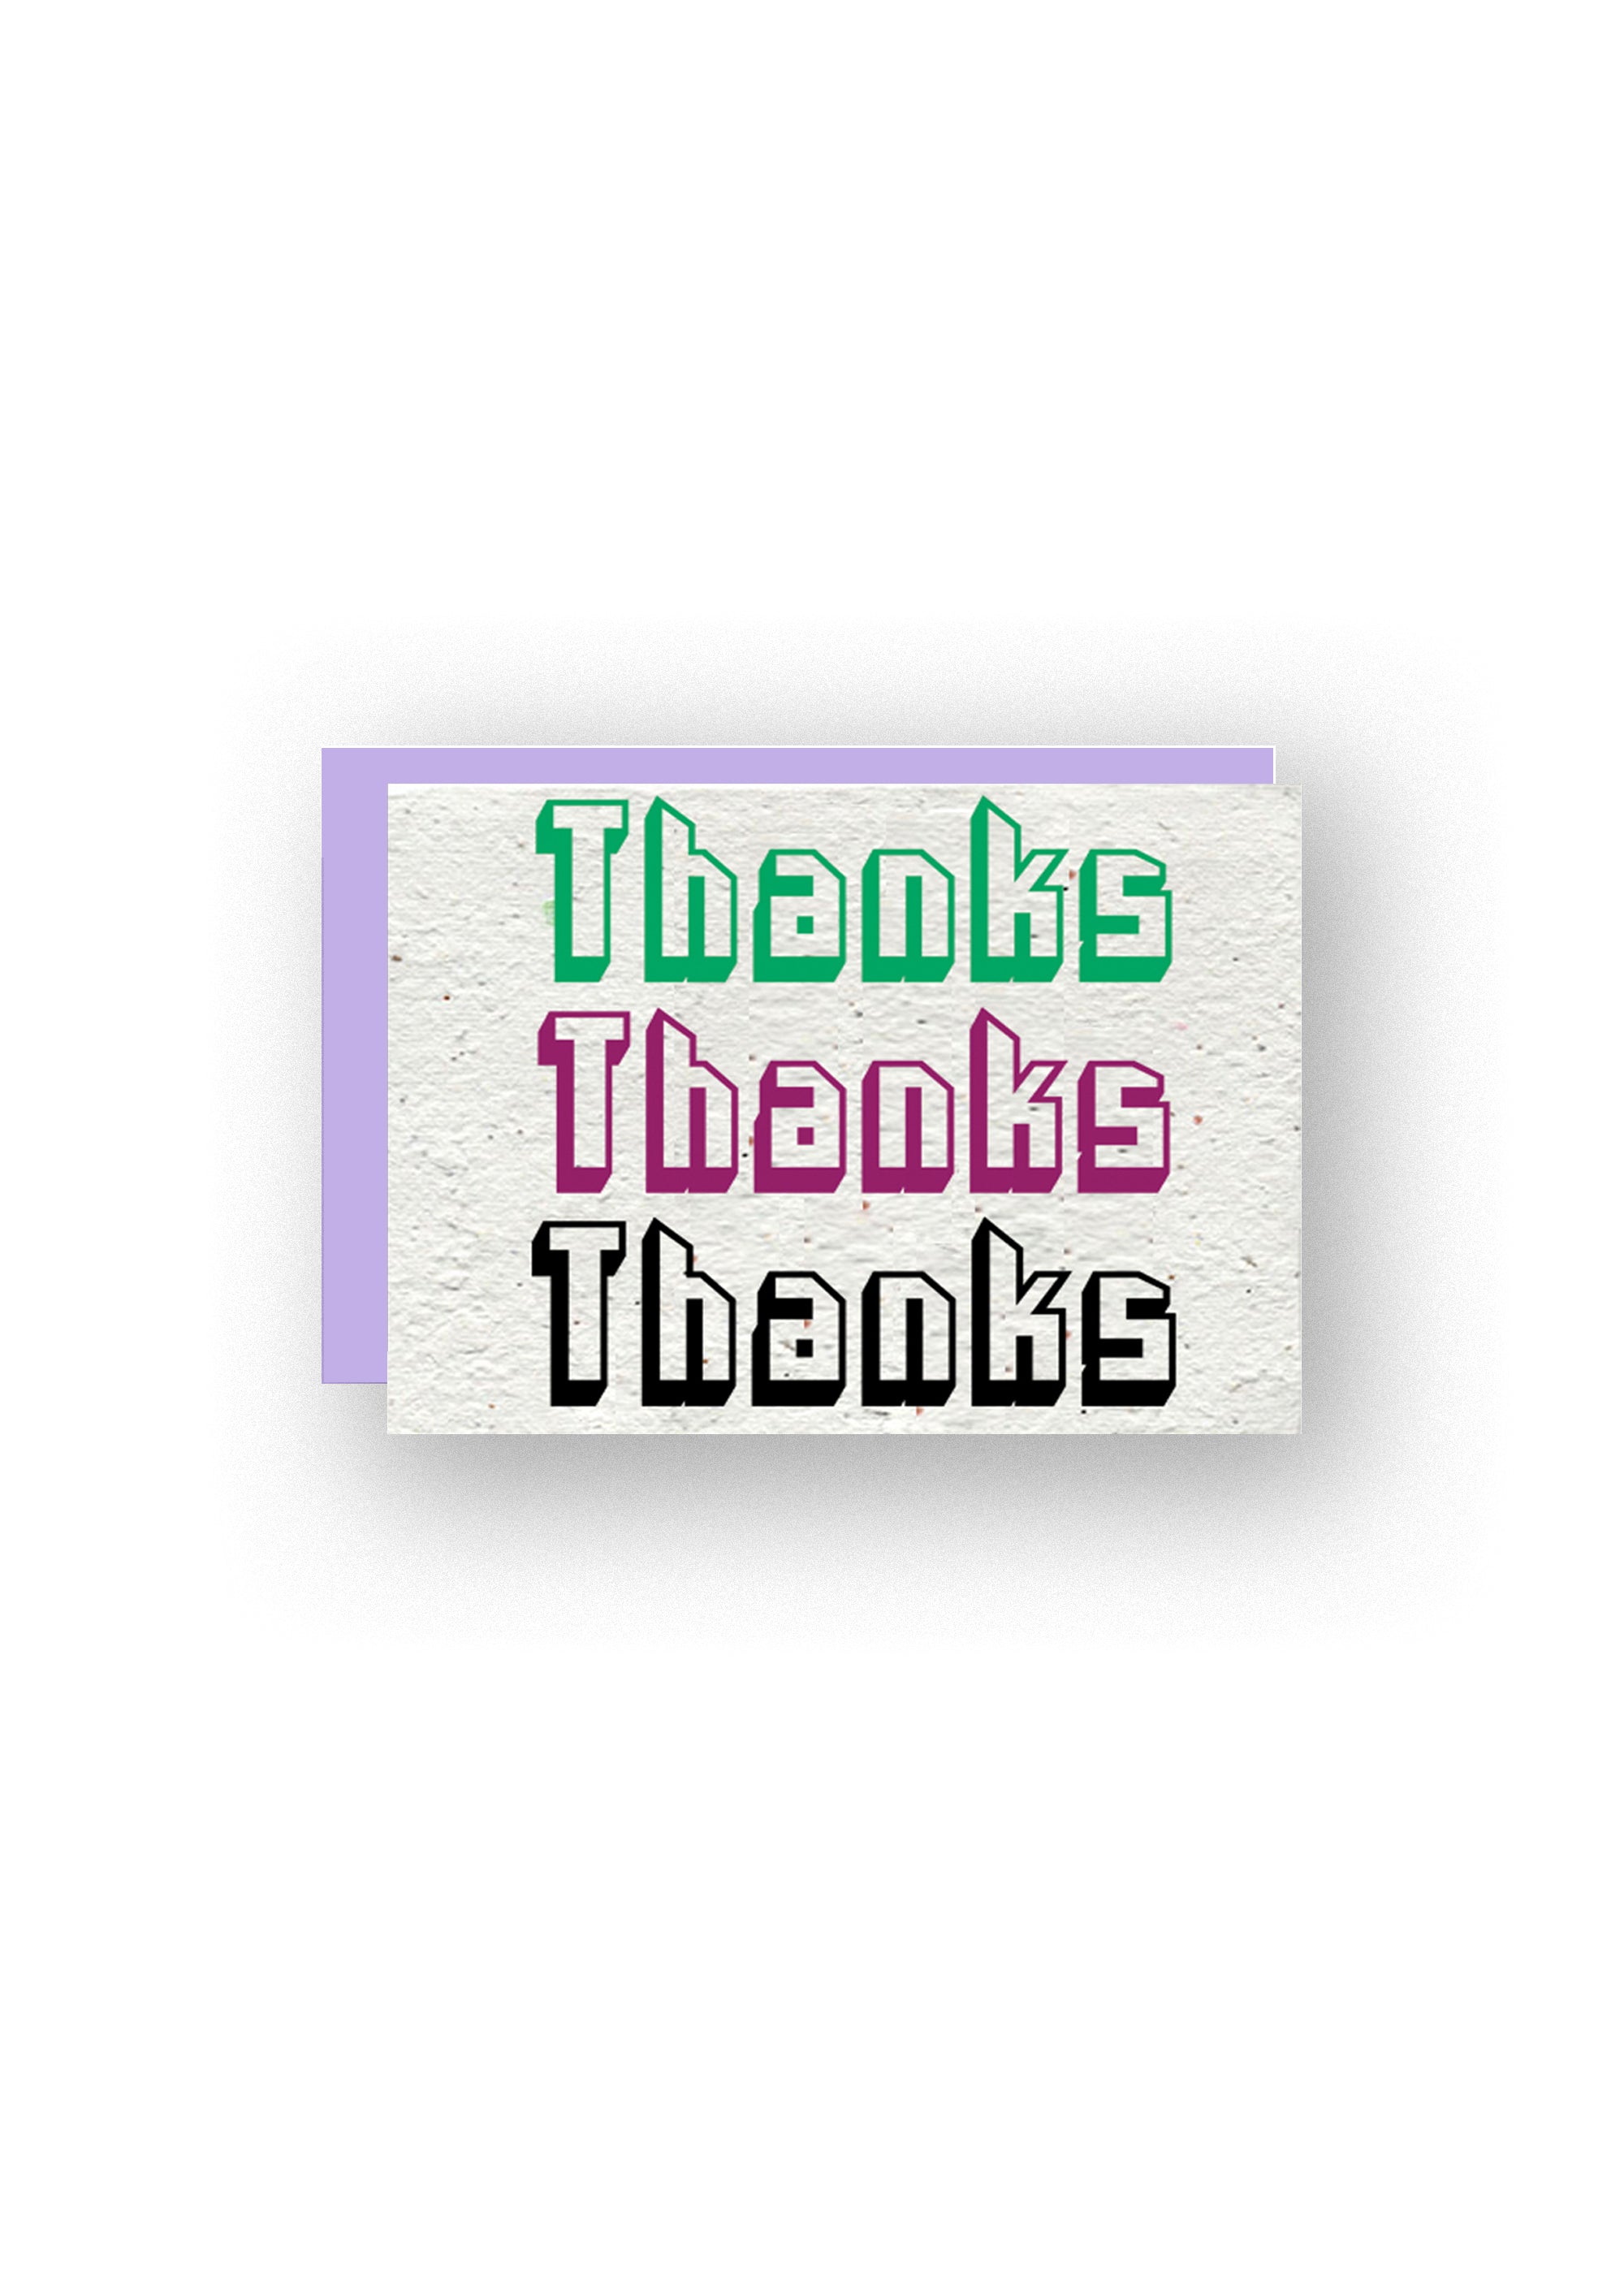 "Thanks Thanks Thanks" Wildflower Seed Paper Card